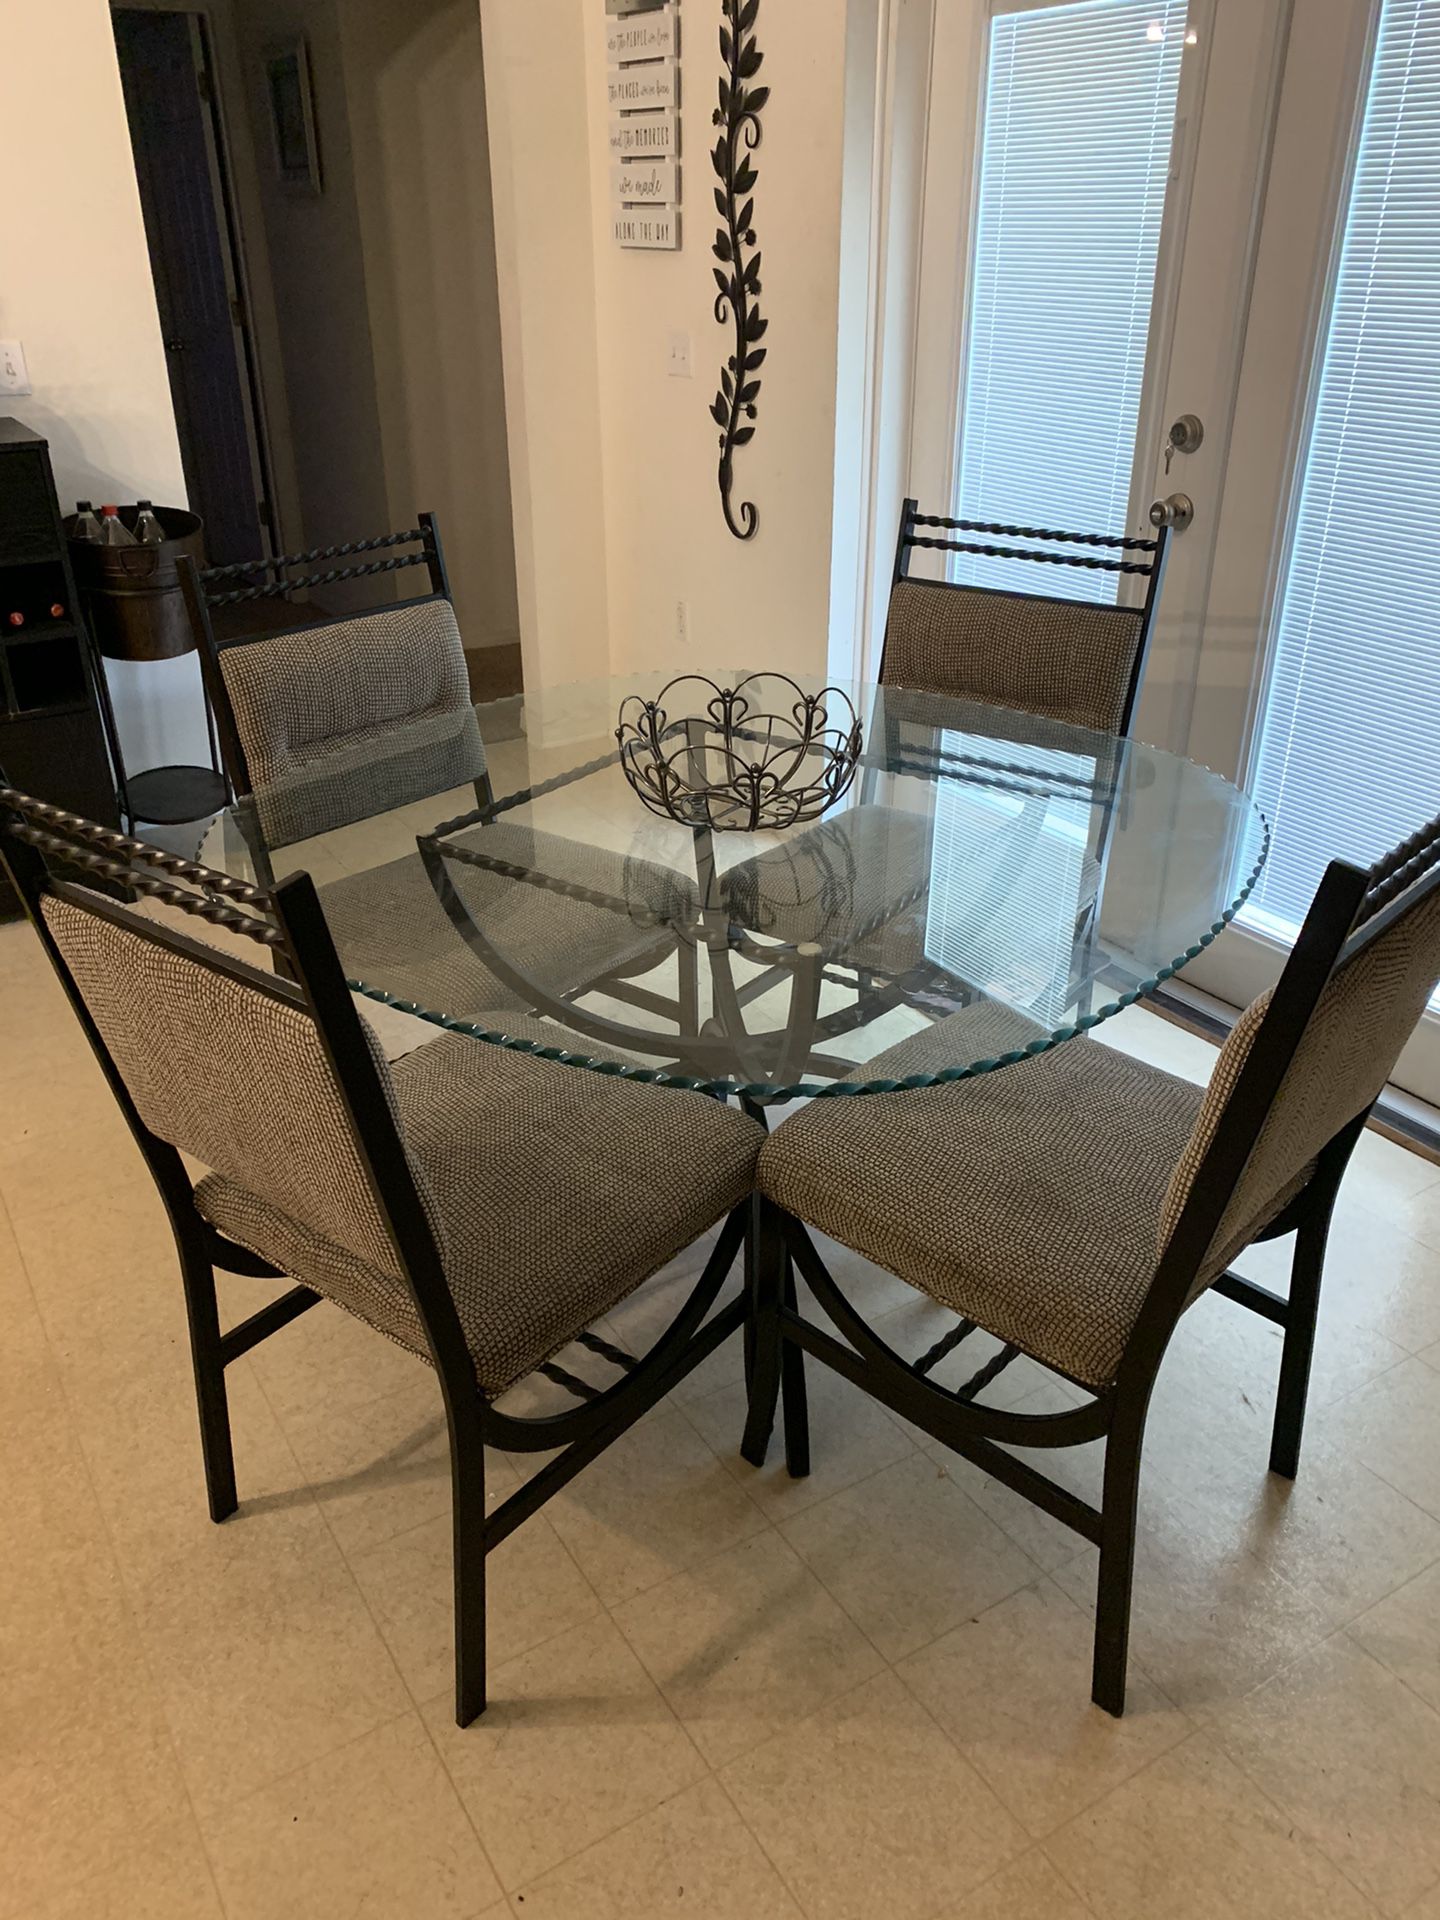 Kitchen table/4 chairs and 2 bar stools for $150